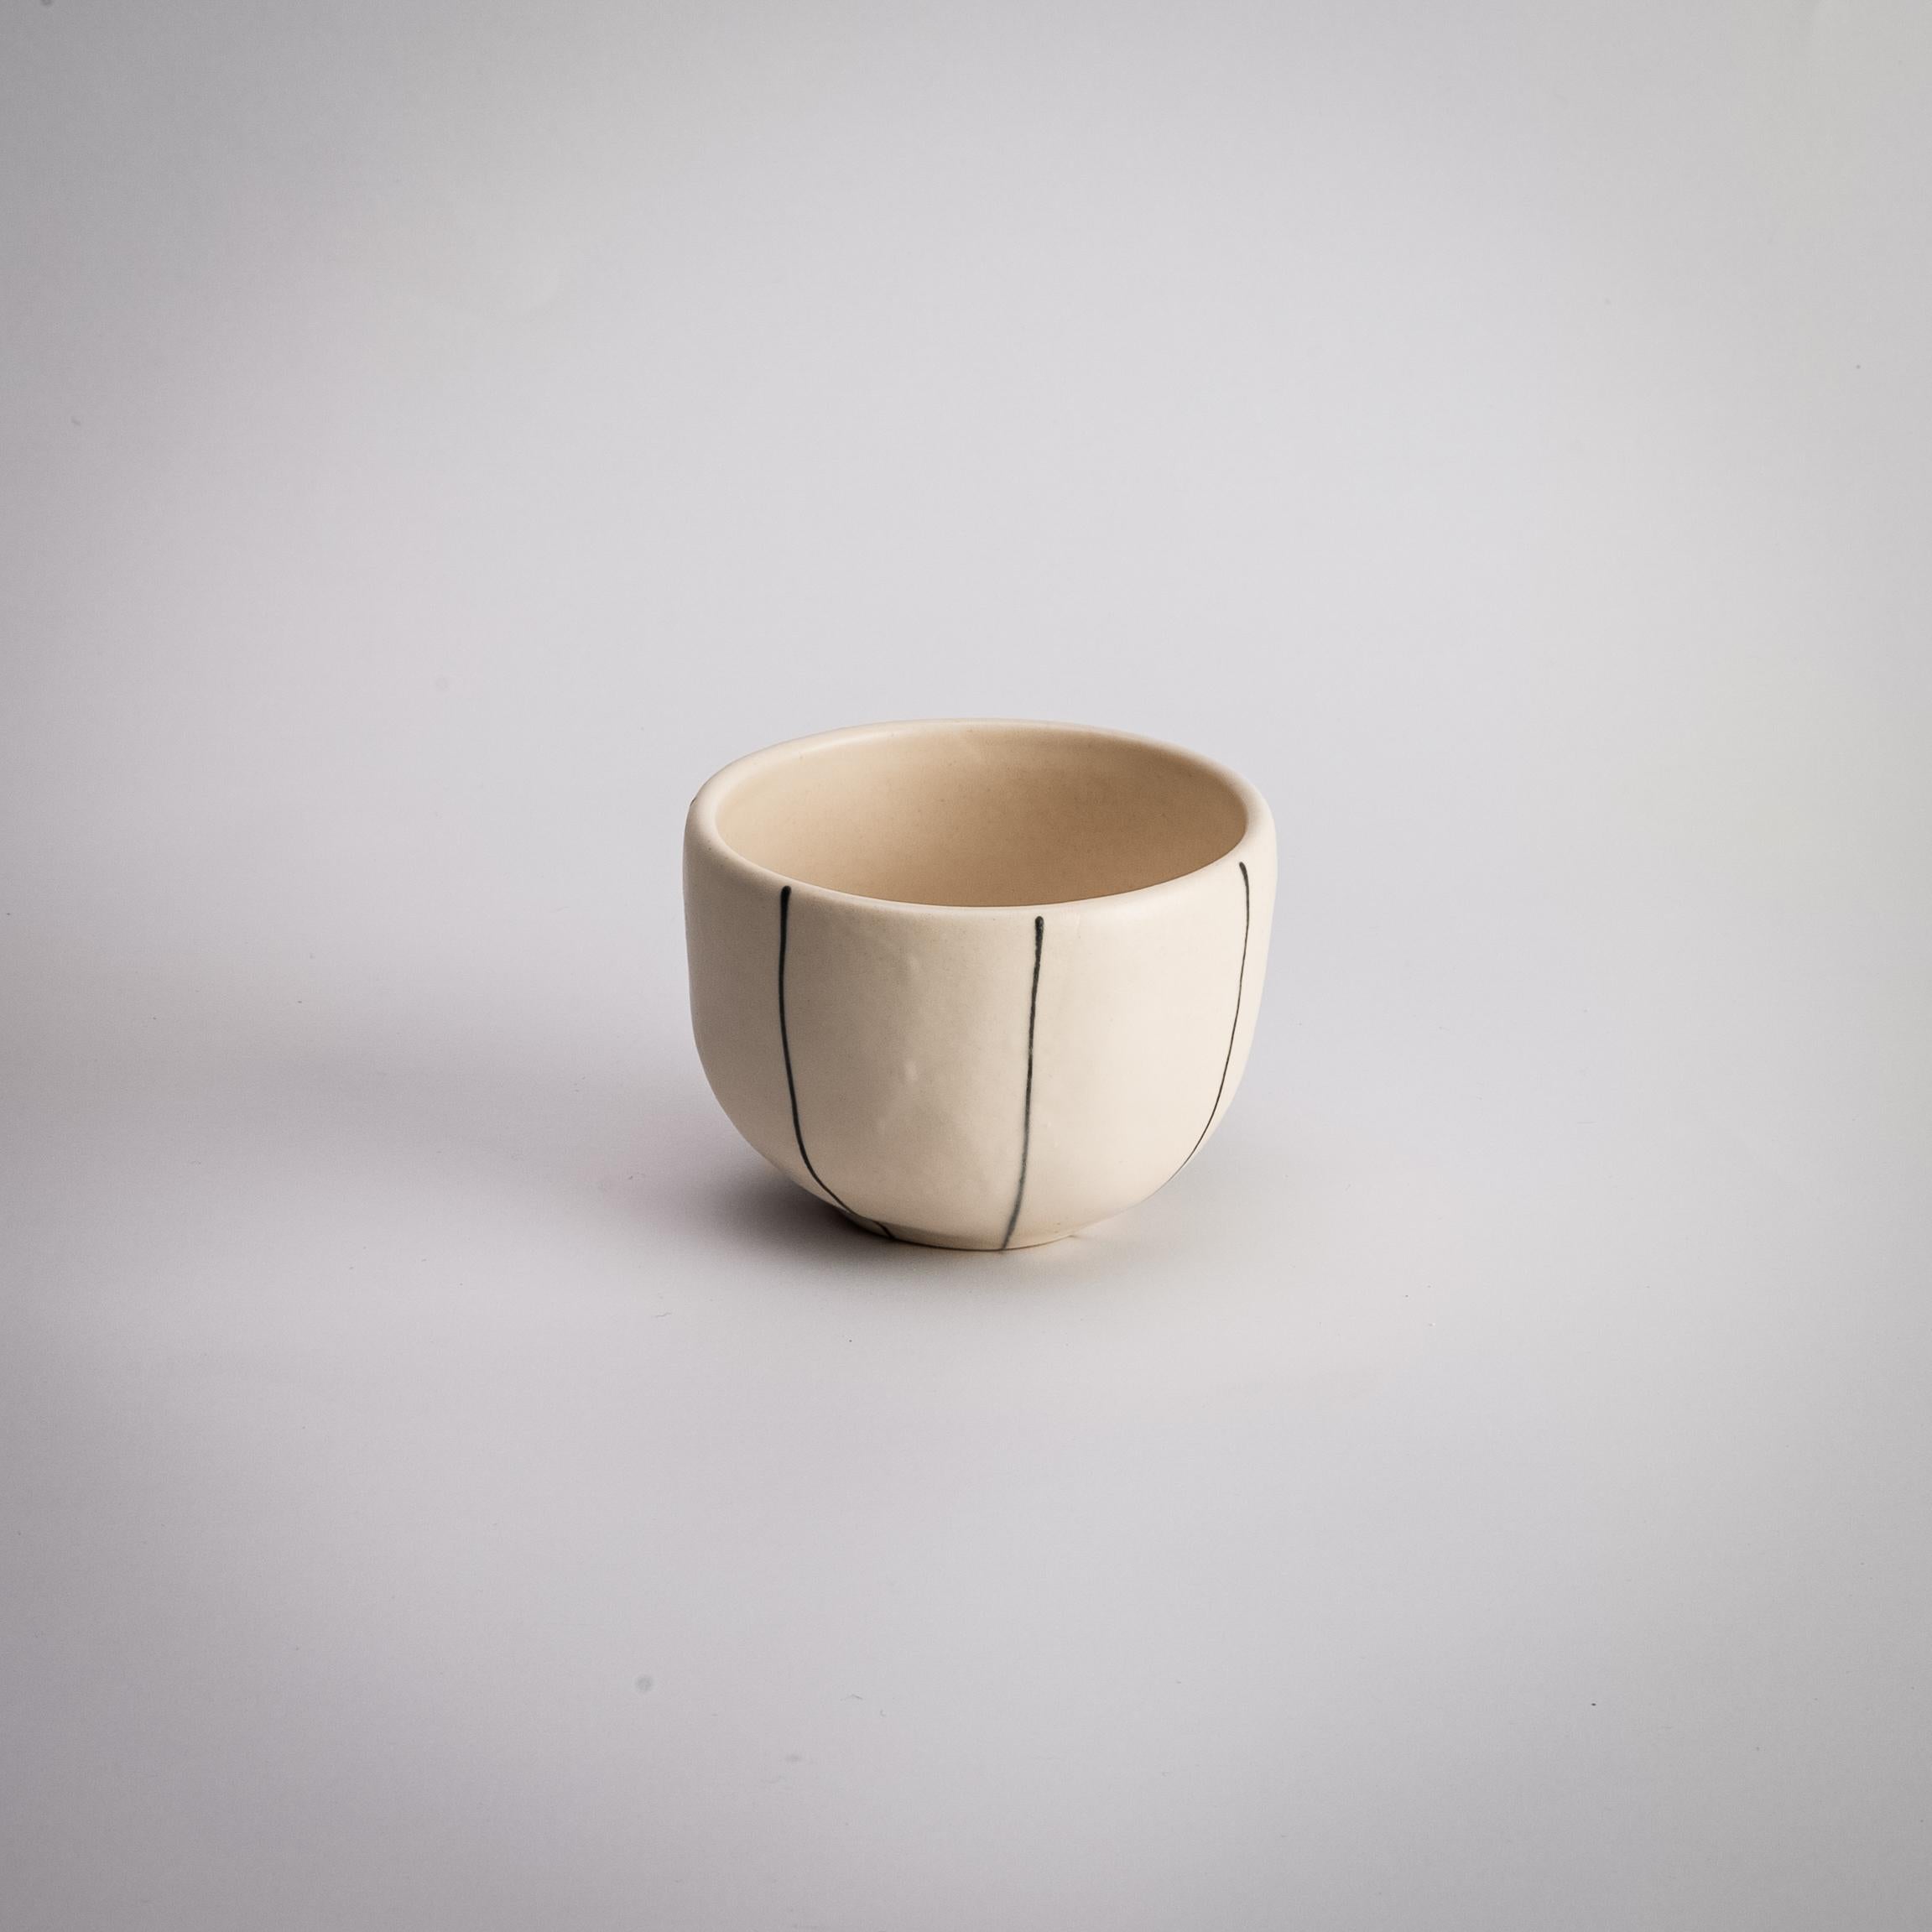 Handmade and unique ceramic espresso cup, 3 Oz. Super cozy, adds beauty in your everyday. Organic shape with matte finish.

